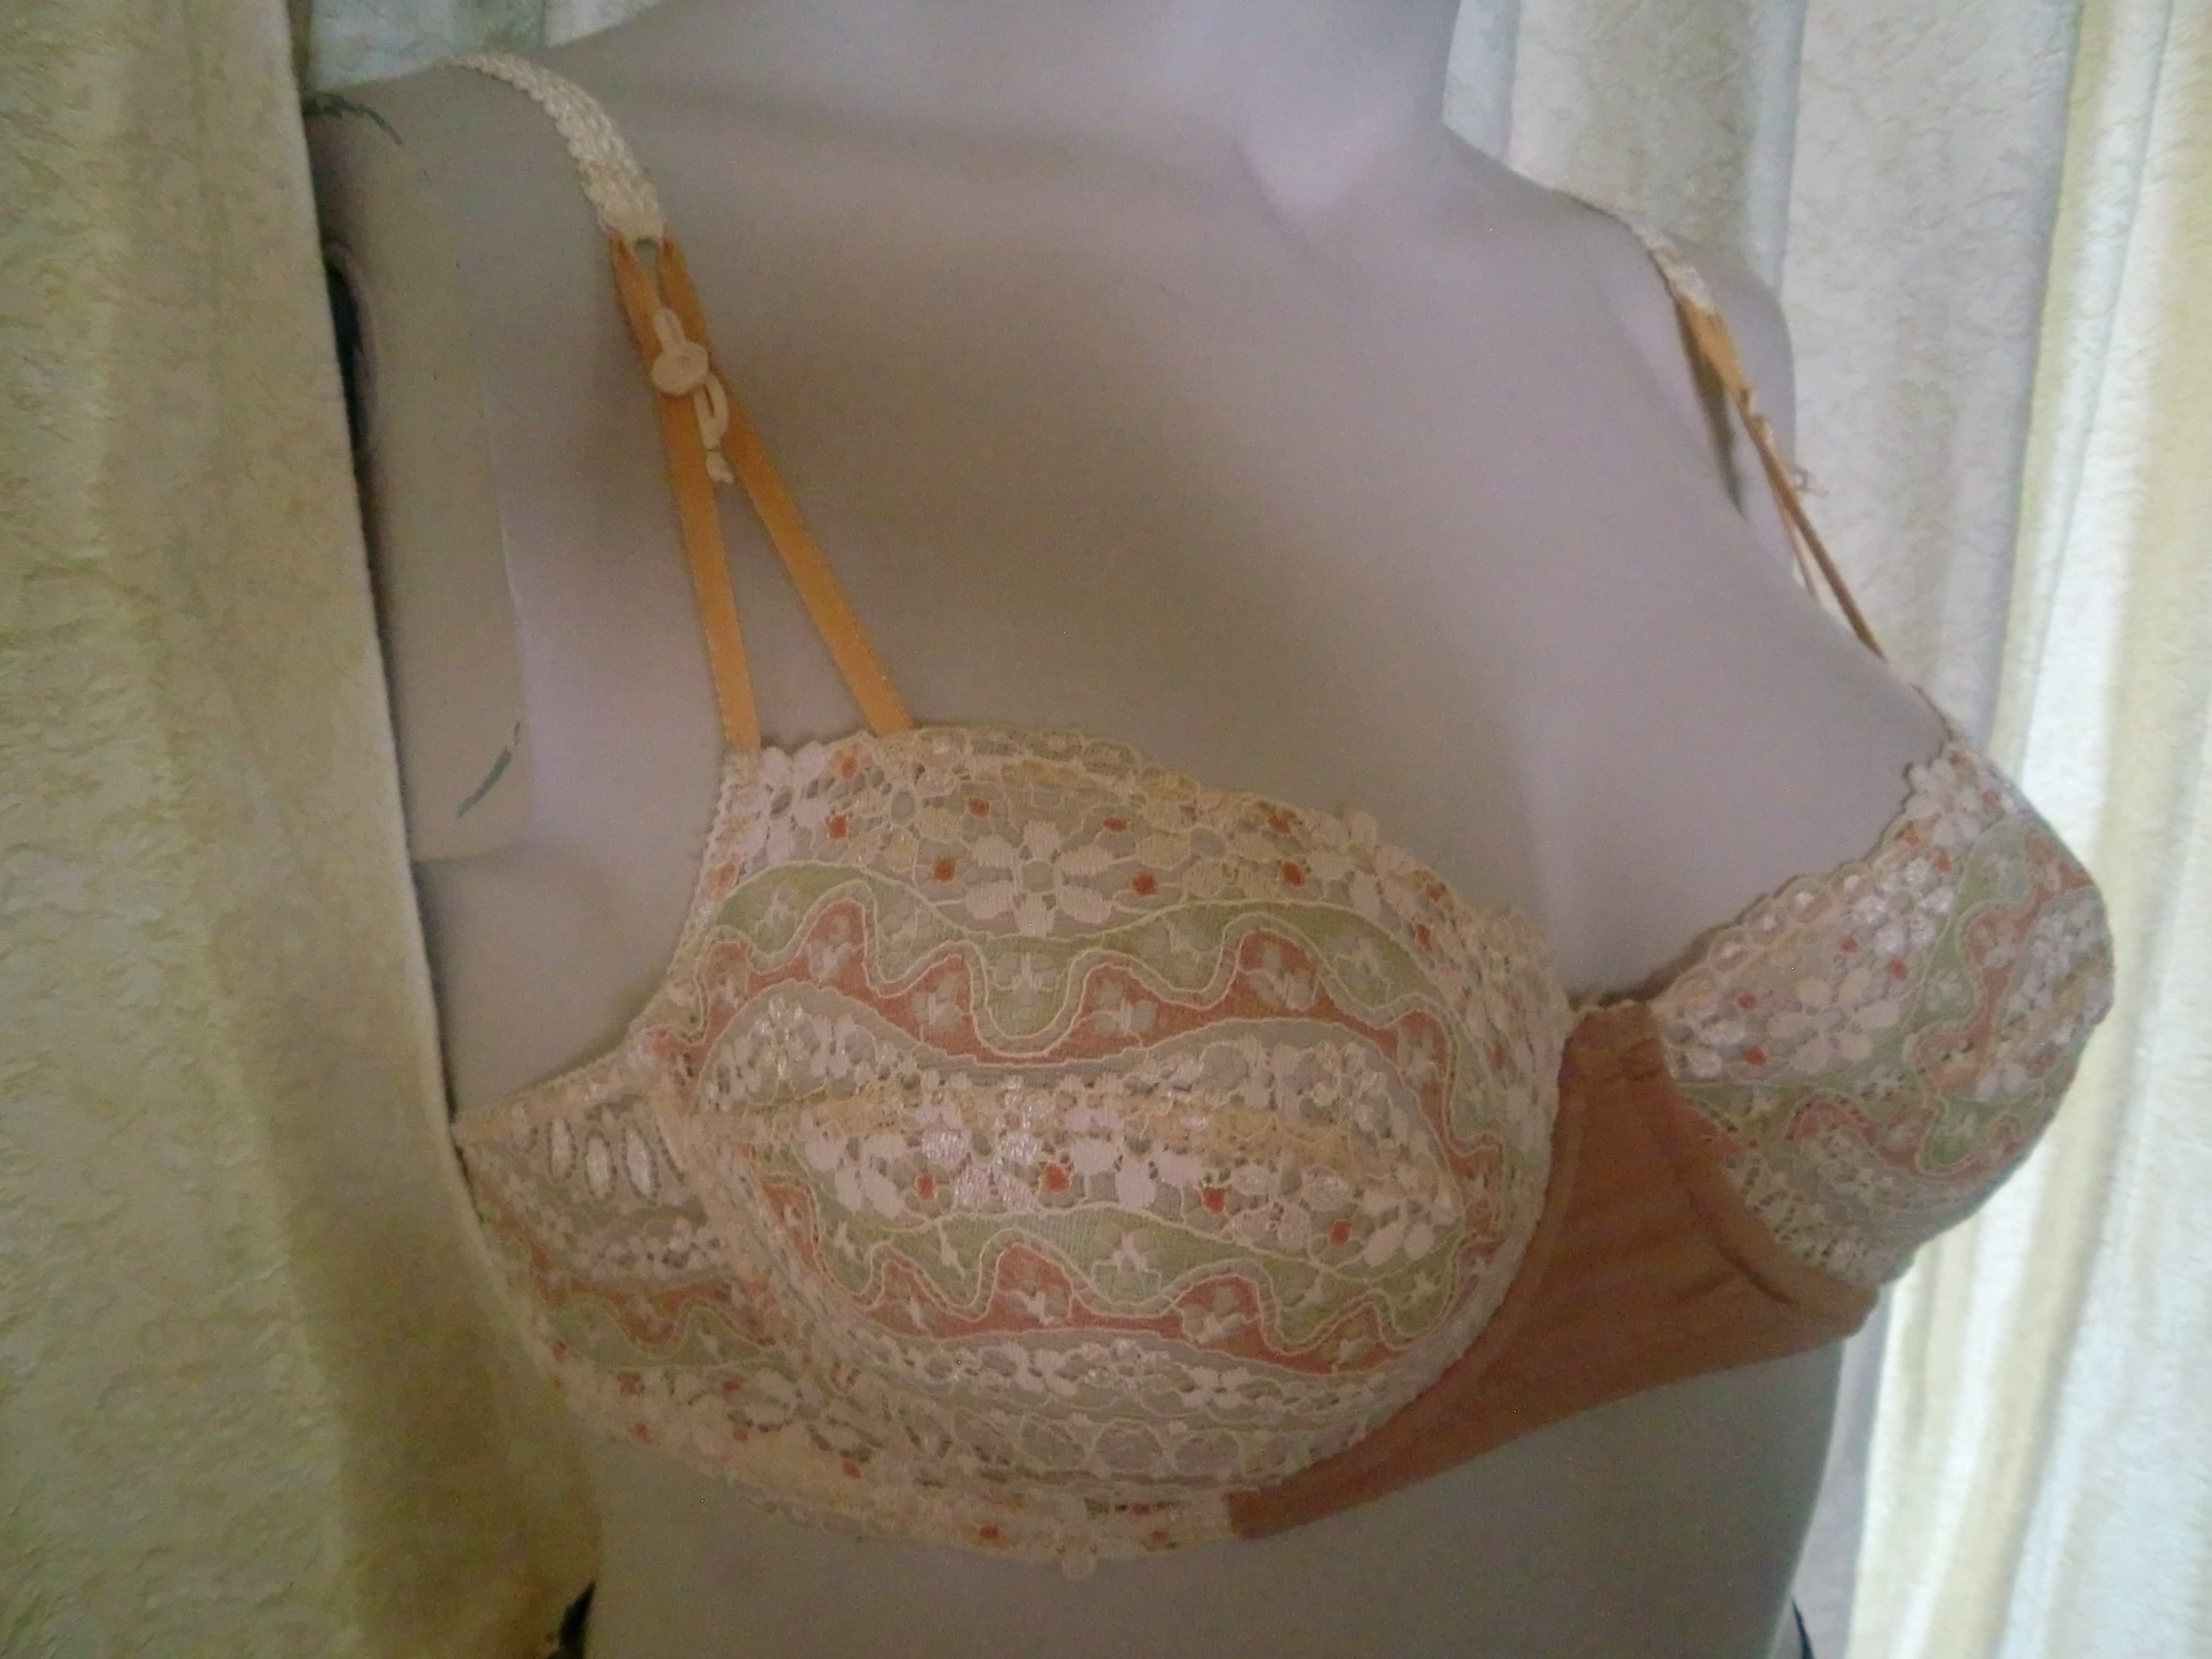 How to add elastic in a bra when lycra switches to scalloped lace